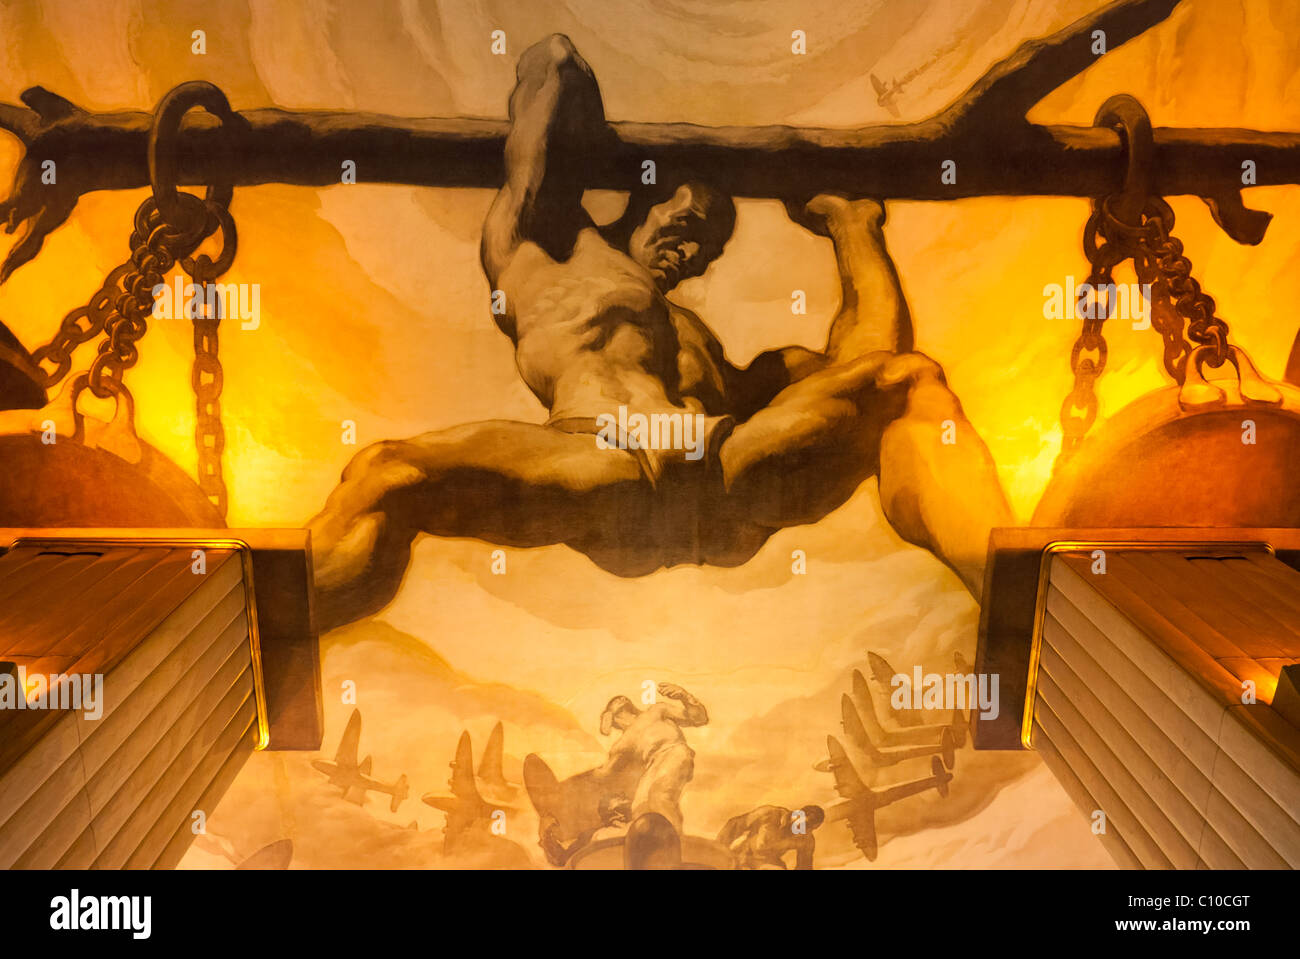 FEB 27 2011 - NYC: 30 Rockefeller Center Lobby ceiling Mural of powerful man by Spanish muralist Jose Maria Sert, Man's Conquest Stock Photo